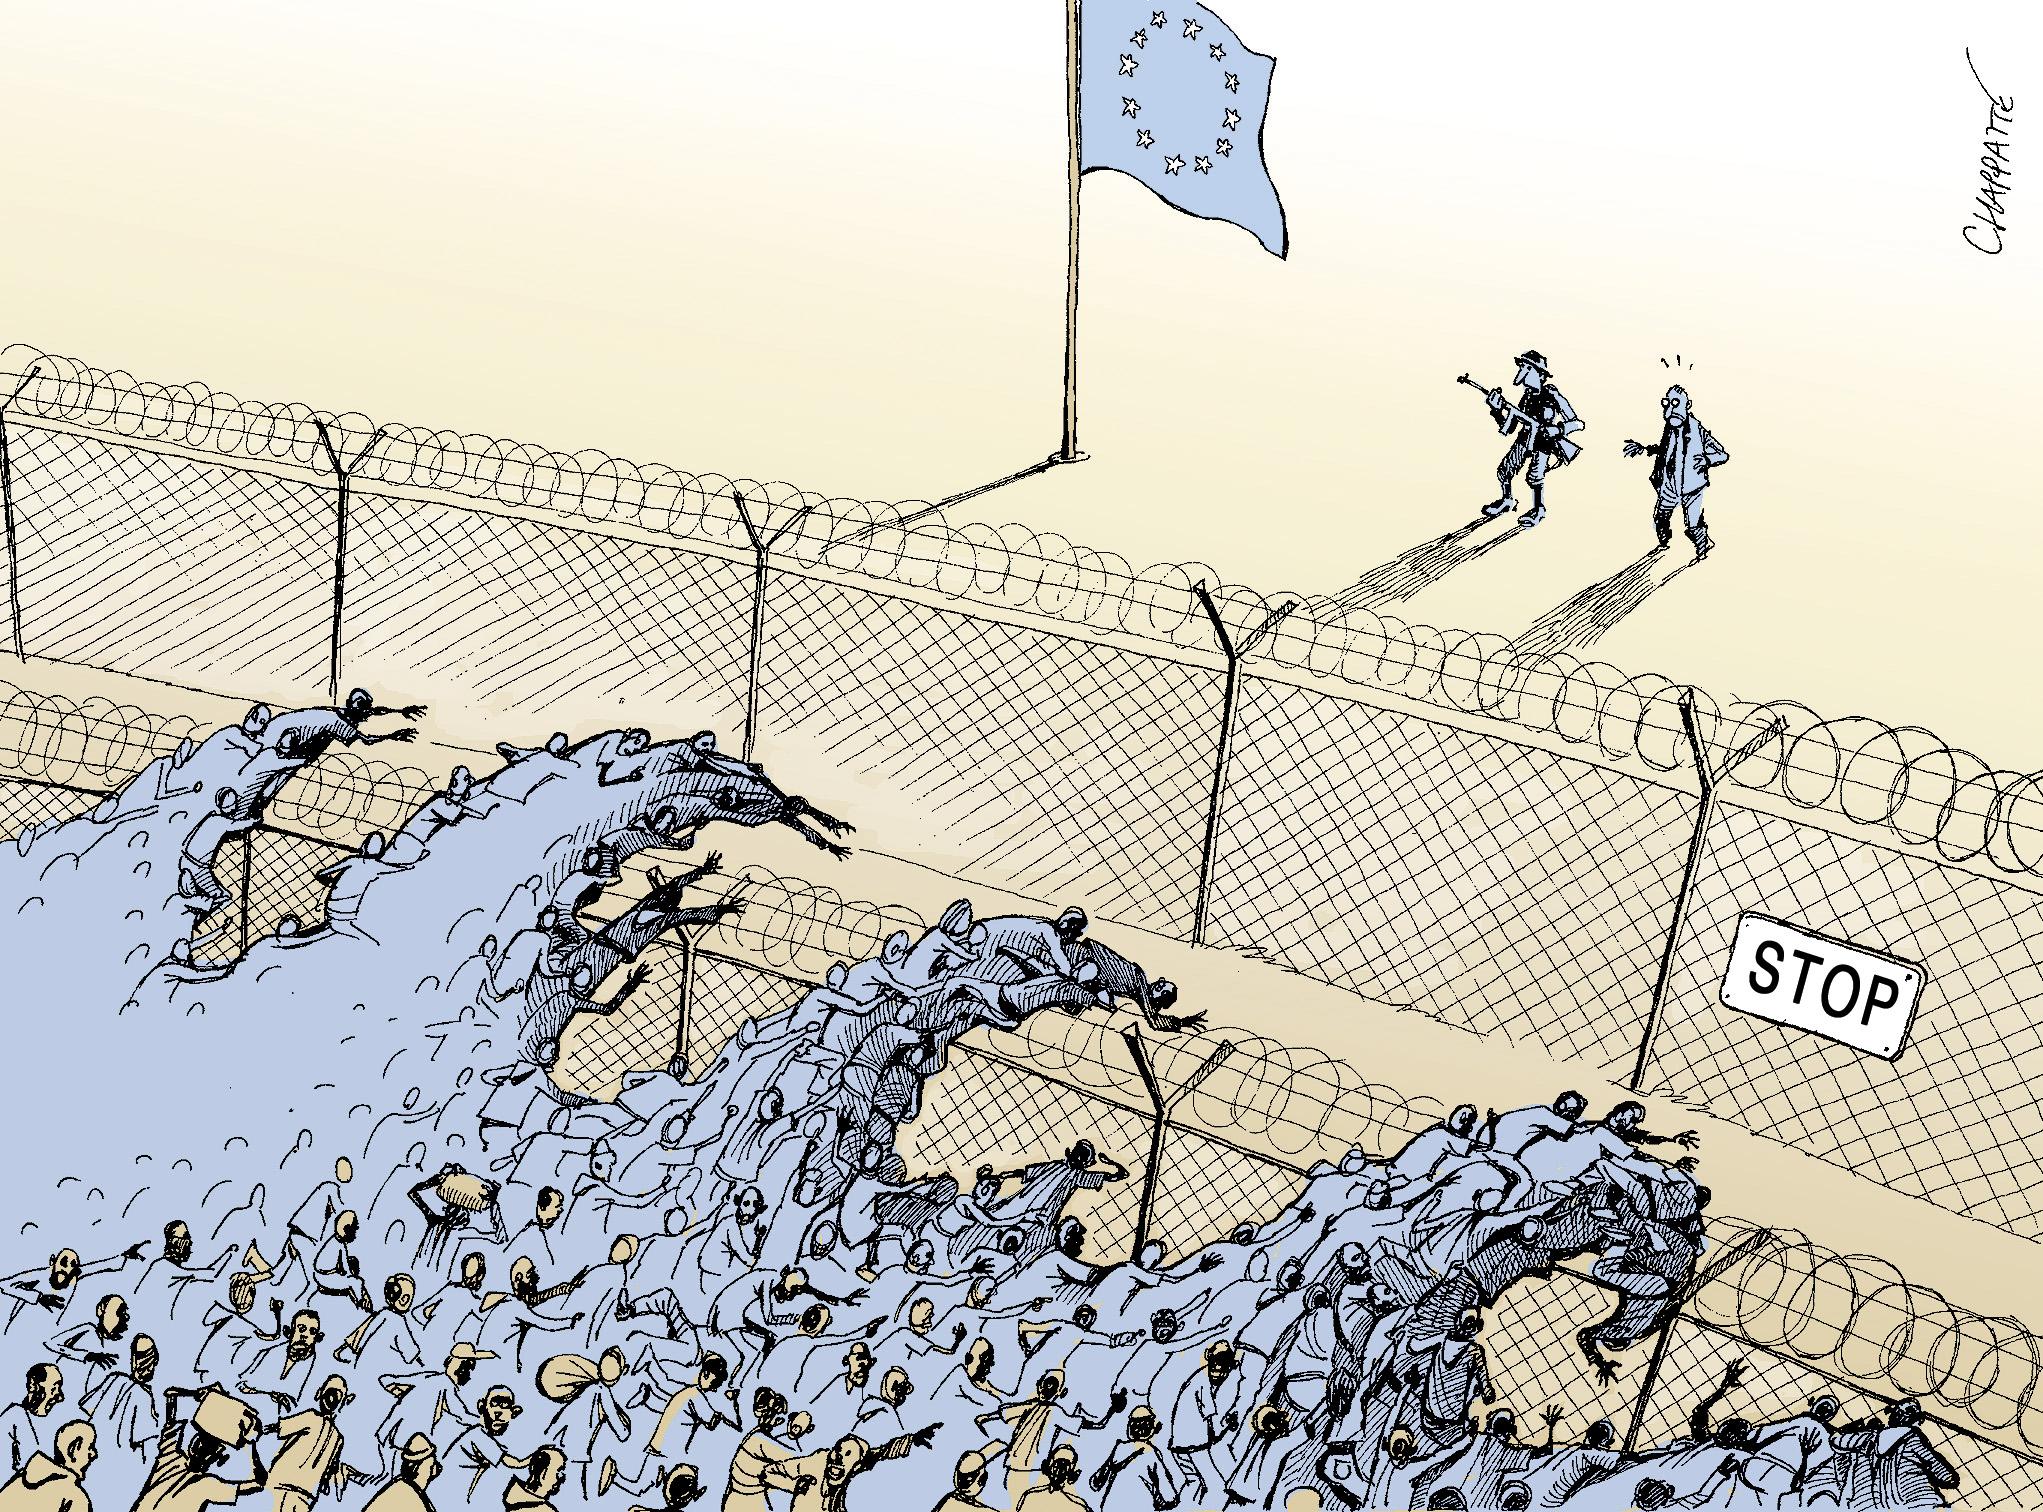 Europe and the migrants